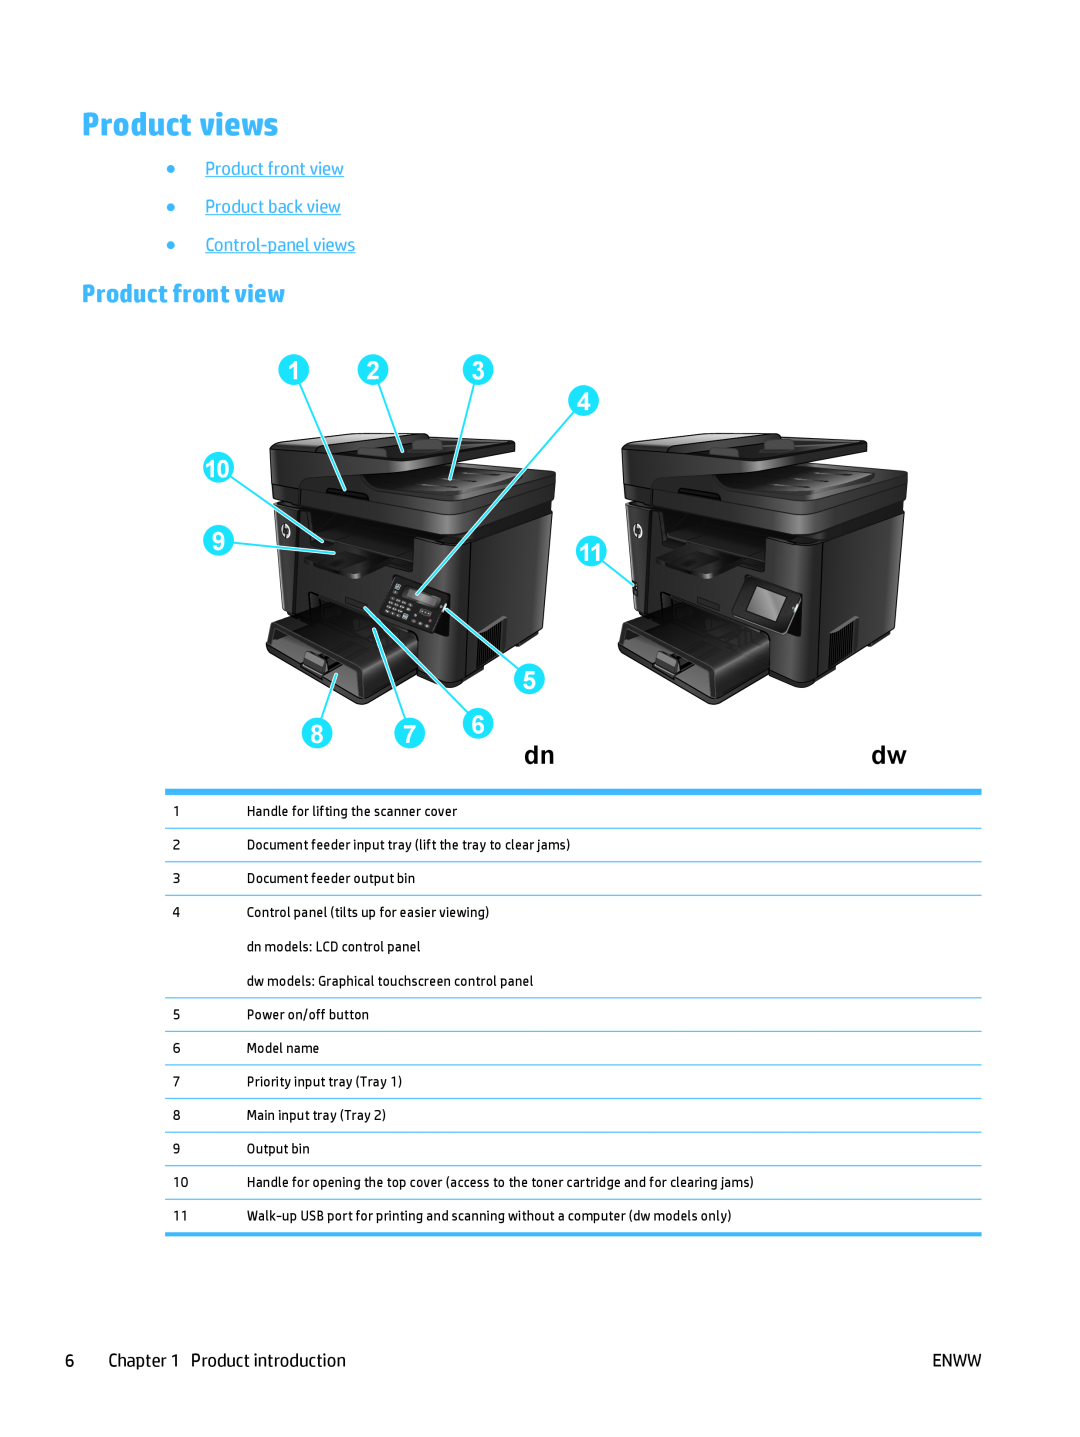 HP MFP M225dn, MFP M225dw manual Product views, Product front view Product back view Control-panel views, dndw 